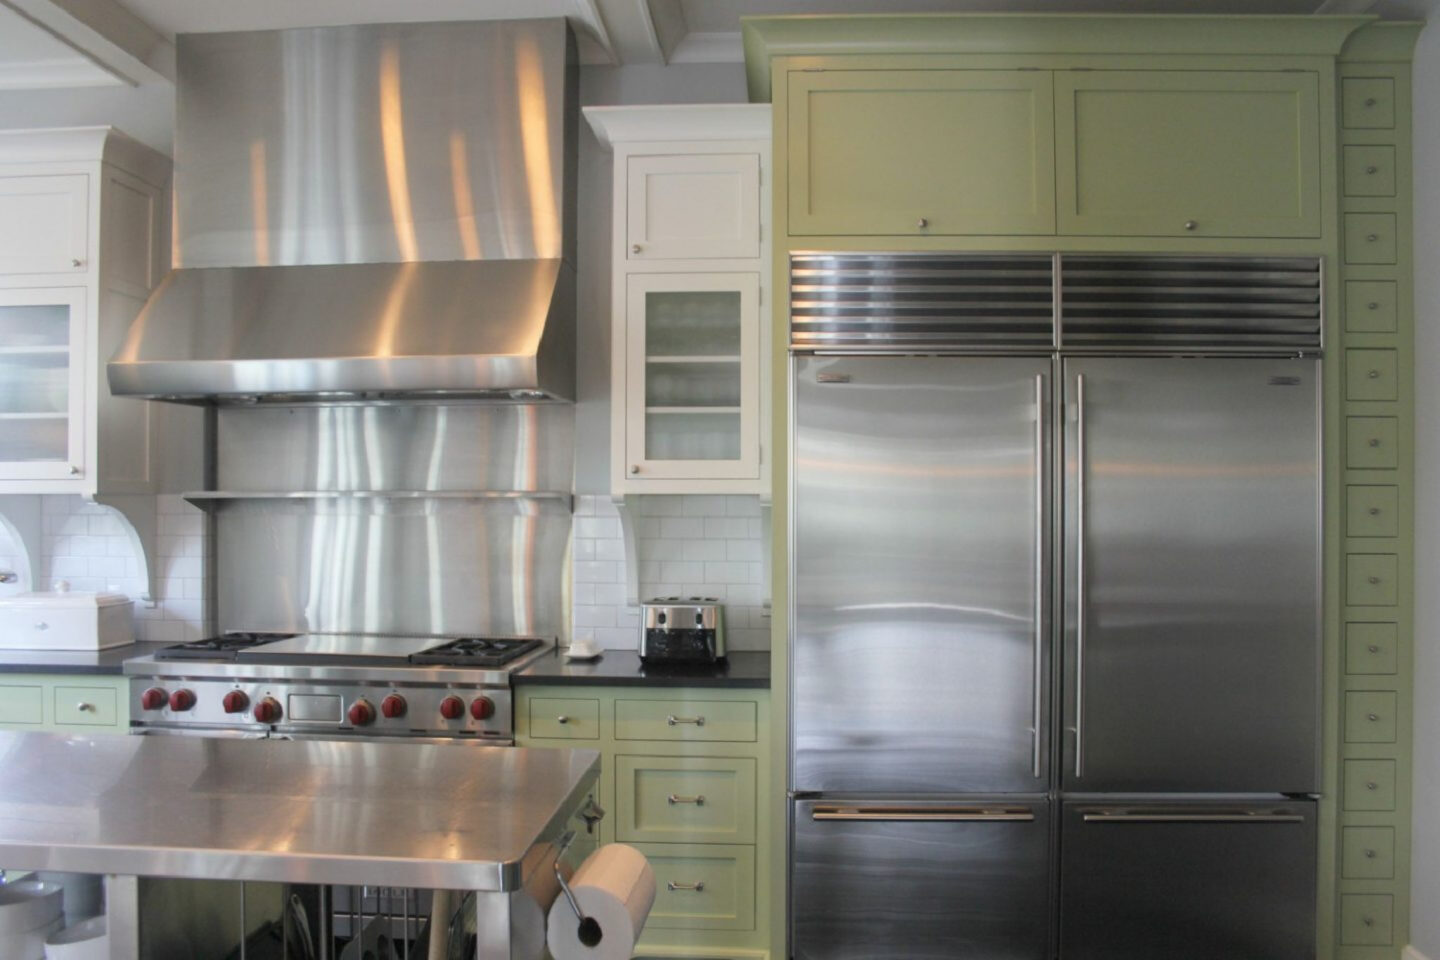 Green cabinets, a commercial stainless frig, and a restaurant style stainless work table in a modern farmhouse kitchen in a renovated 1875 Barrington farmhouse - Hello Lovely Studio.